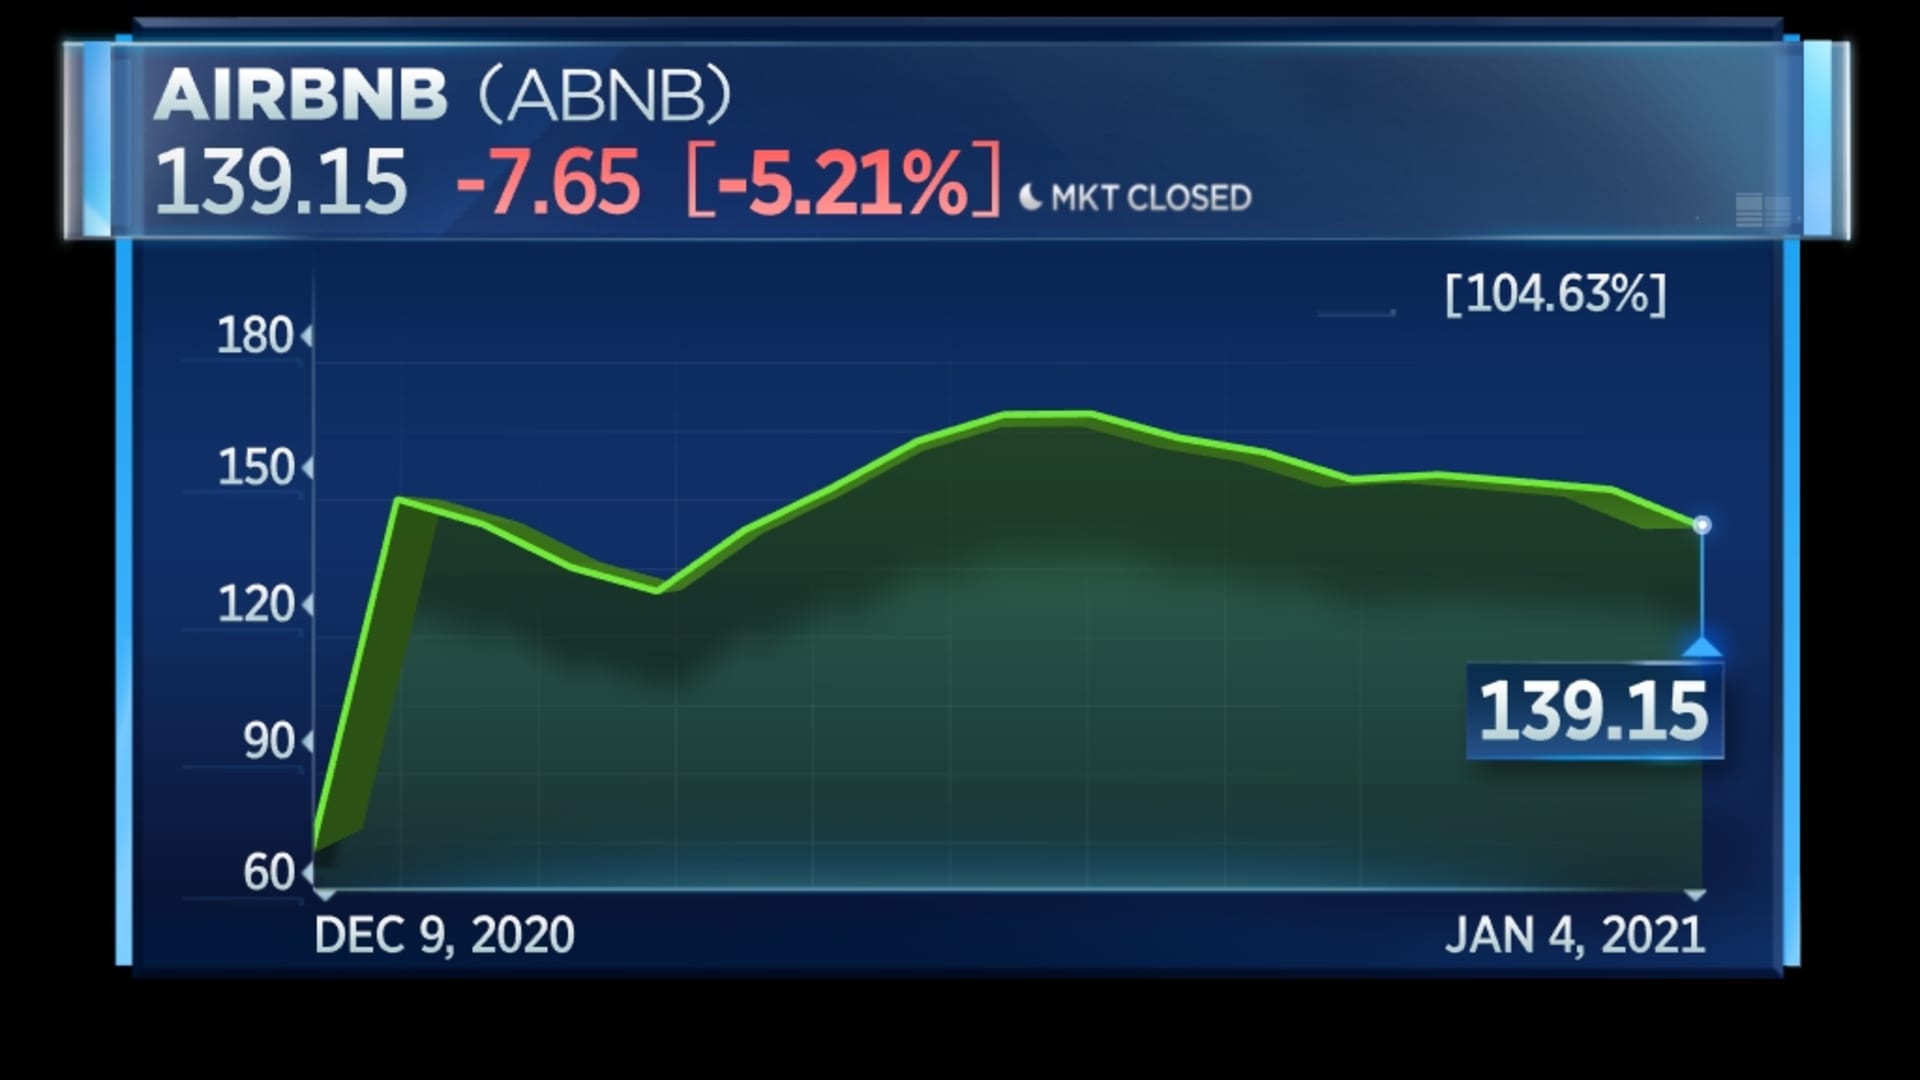 Airbnb stock chart